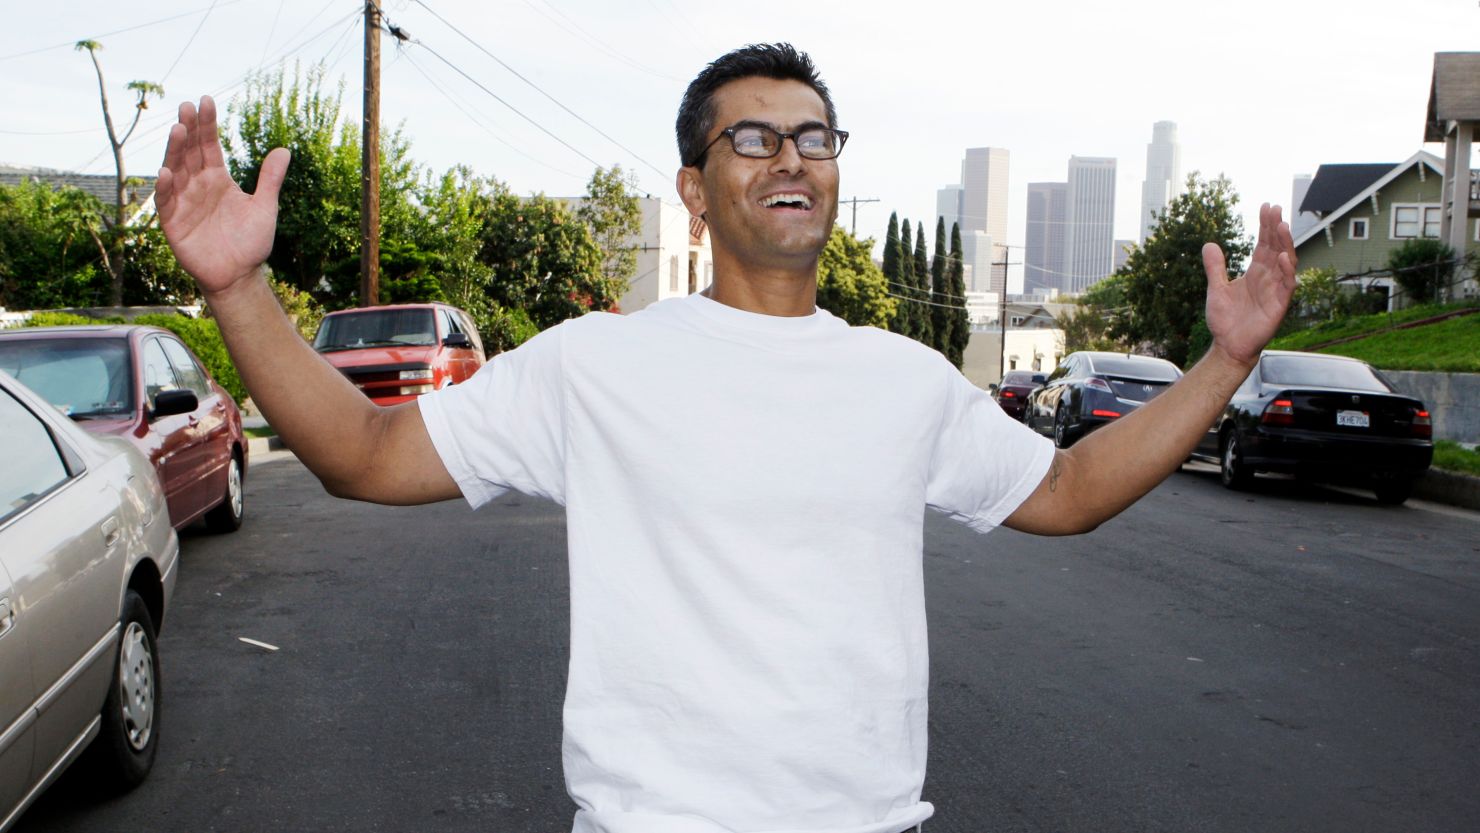 Francisco "Franky" Carrillo gestures while posing for a portrait on a street overlooking downtown Los Angeles on March 16, 2011. 